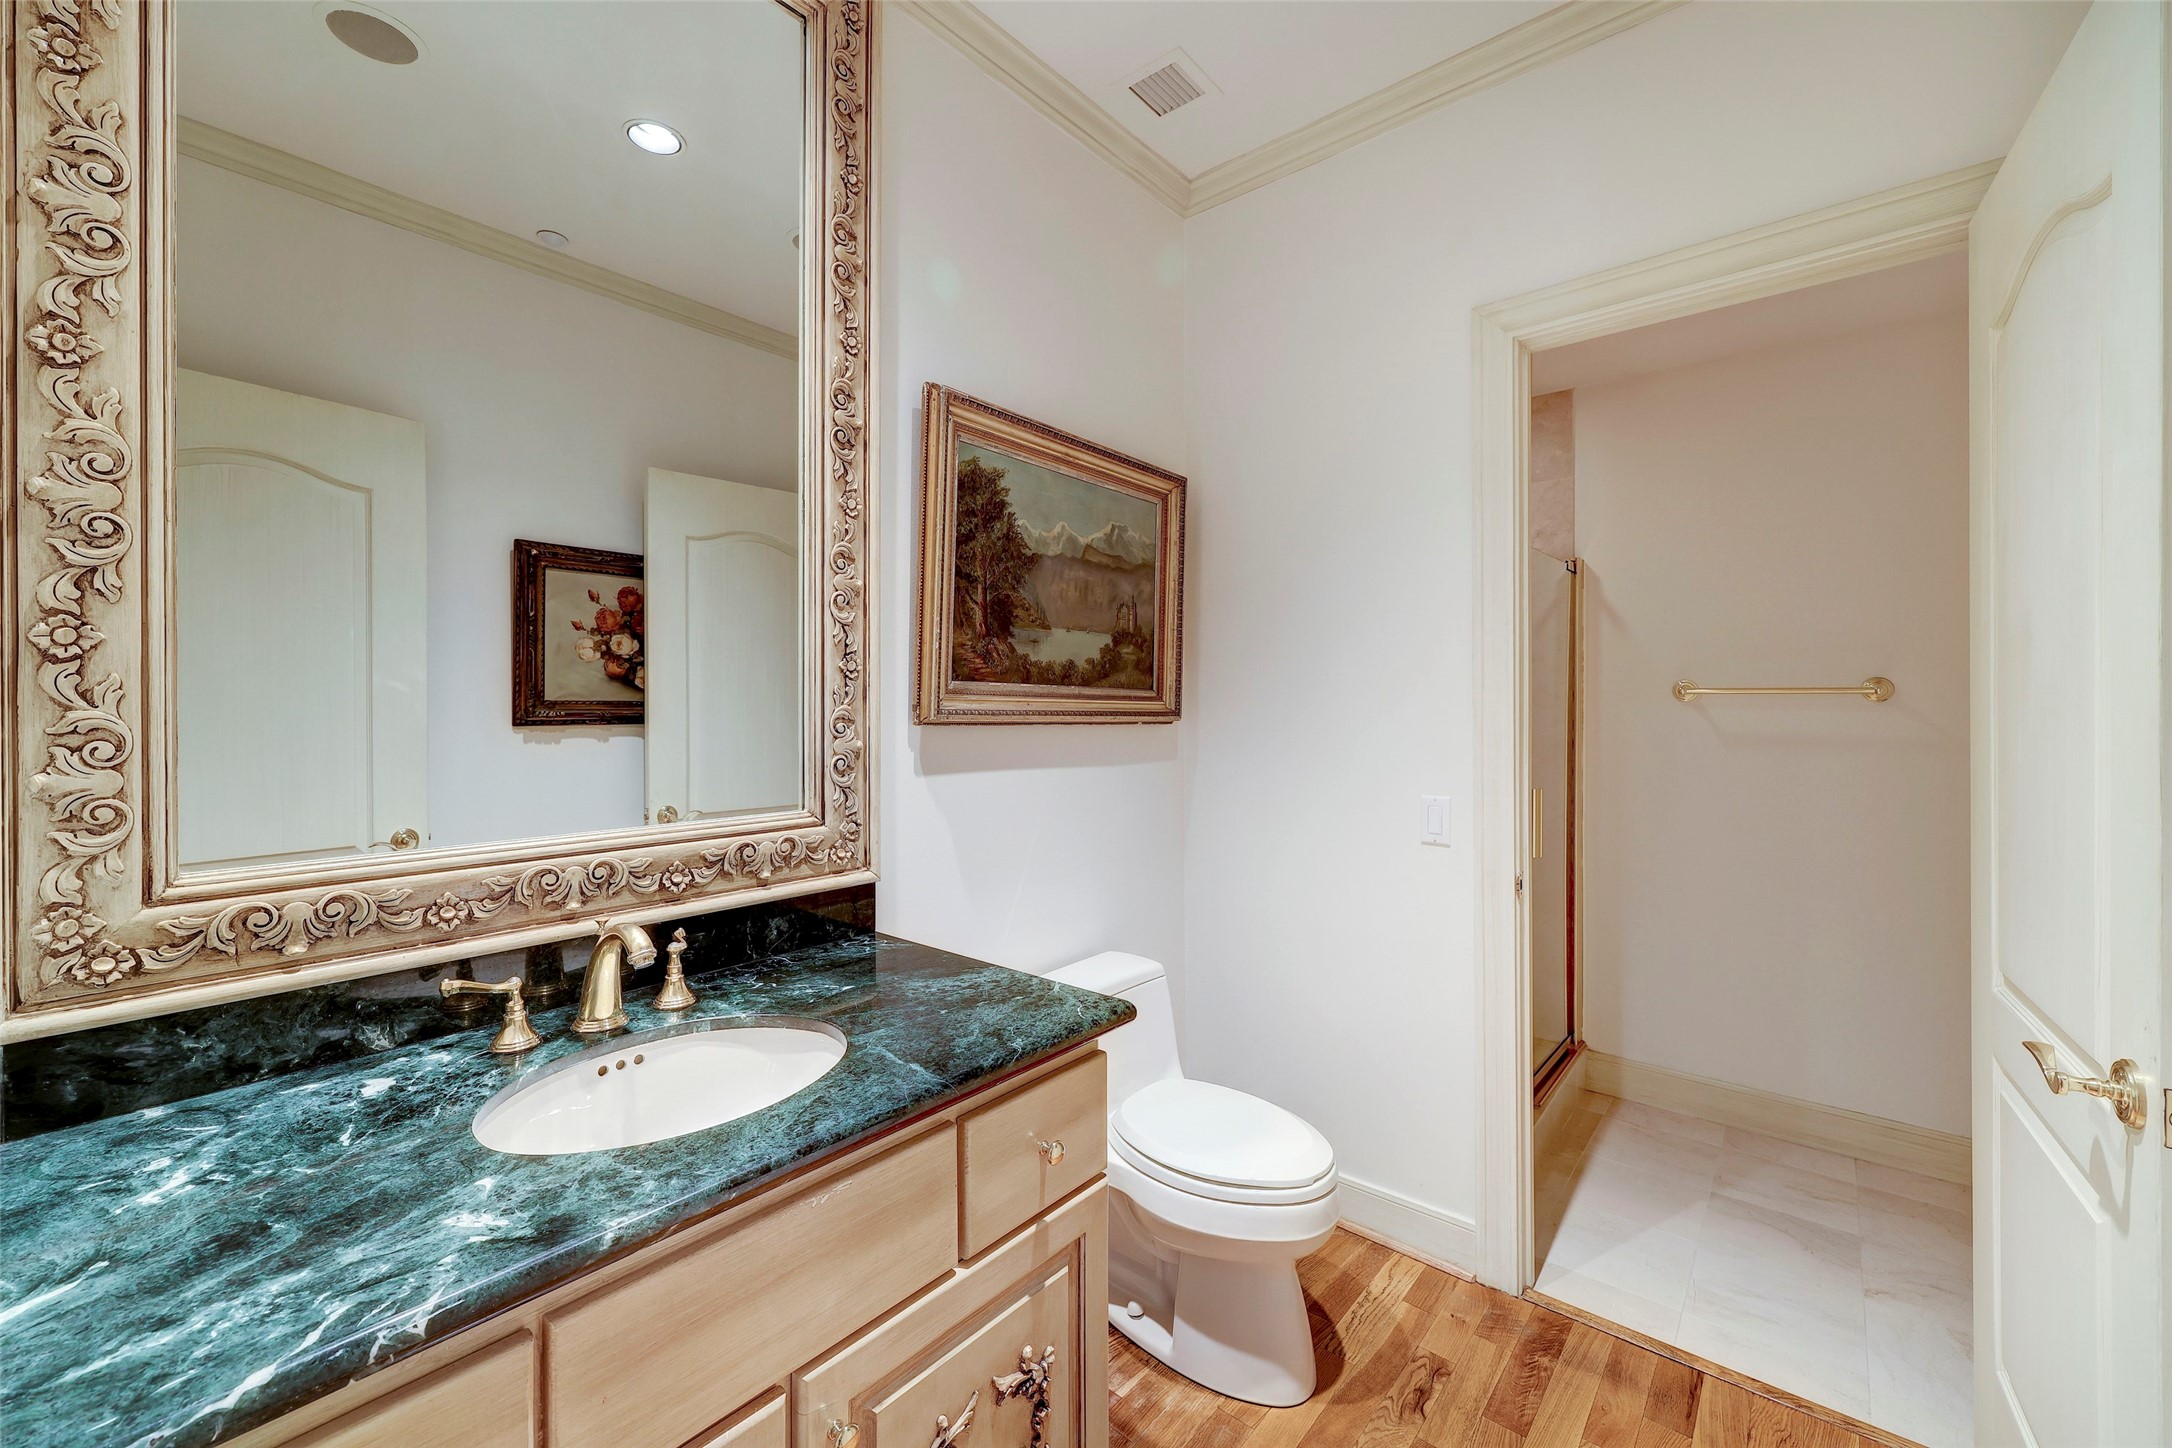 A full second bathroom with marble counters and stand up shower.